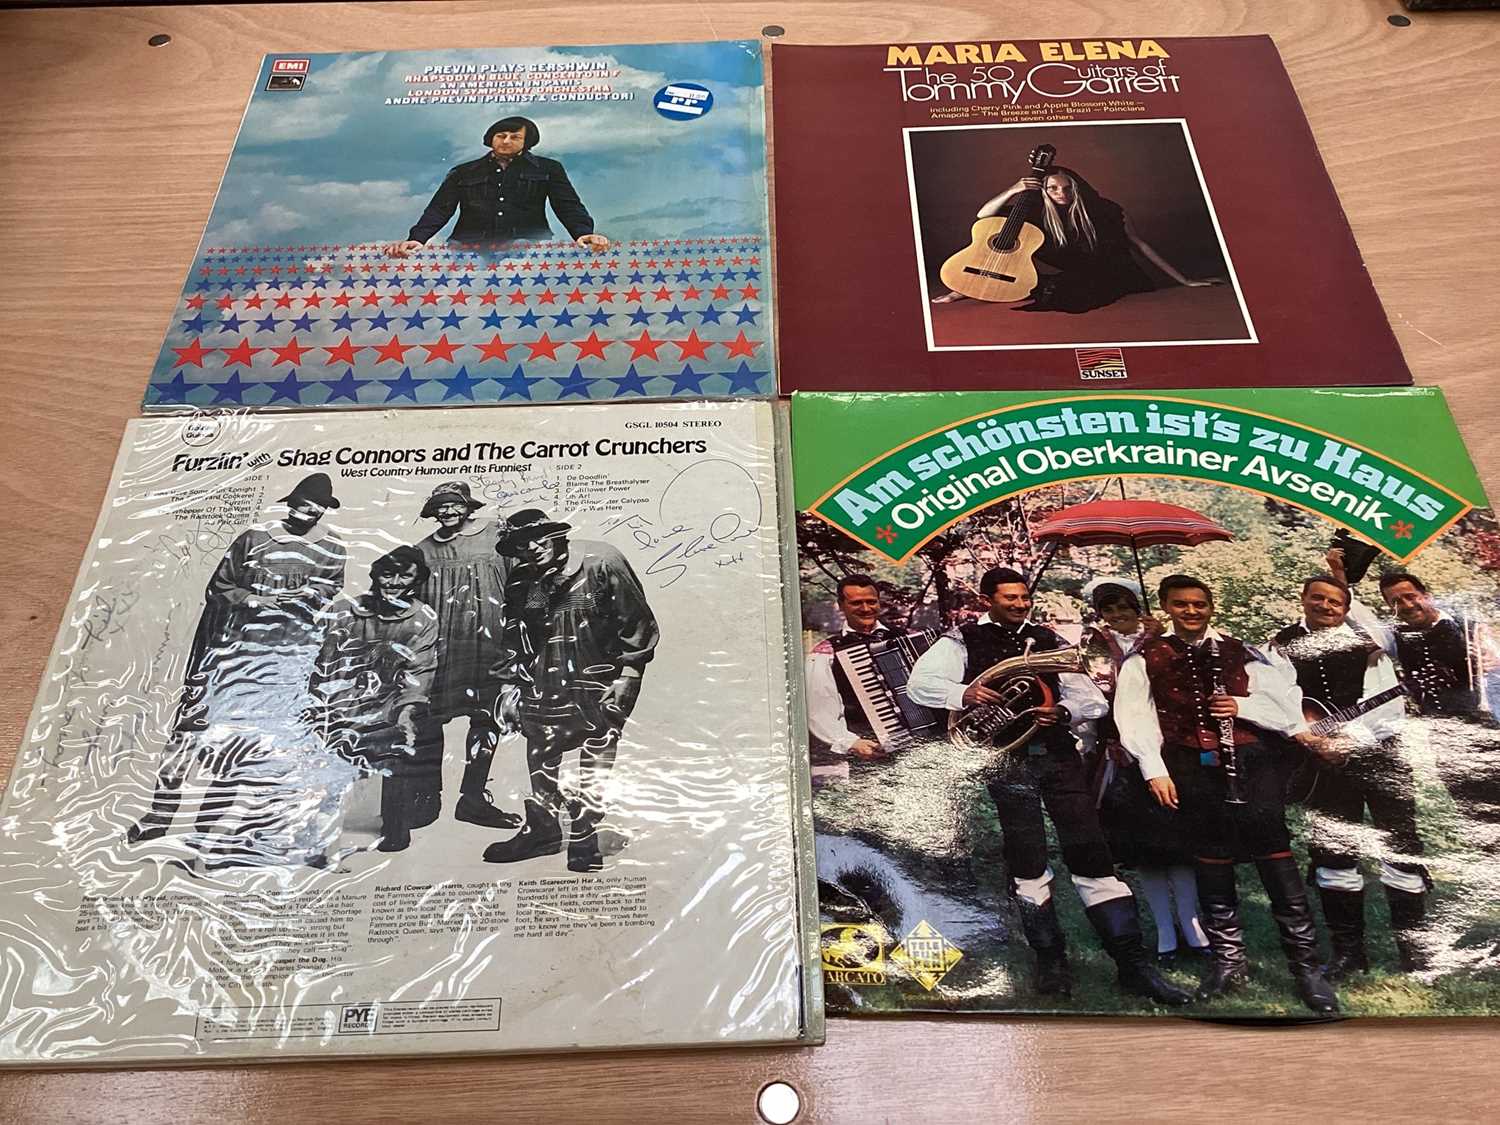 Two vintage cases of LP records, 78's and 45's including Ray Conniff, Deep Purple, ABBA, Petula Clar - Image 6 of 11